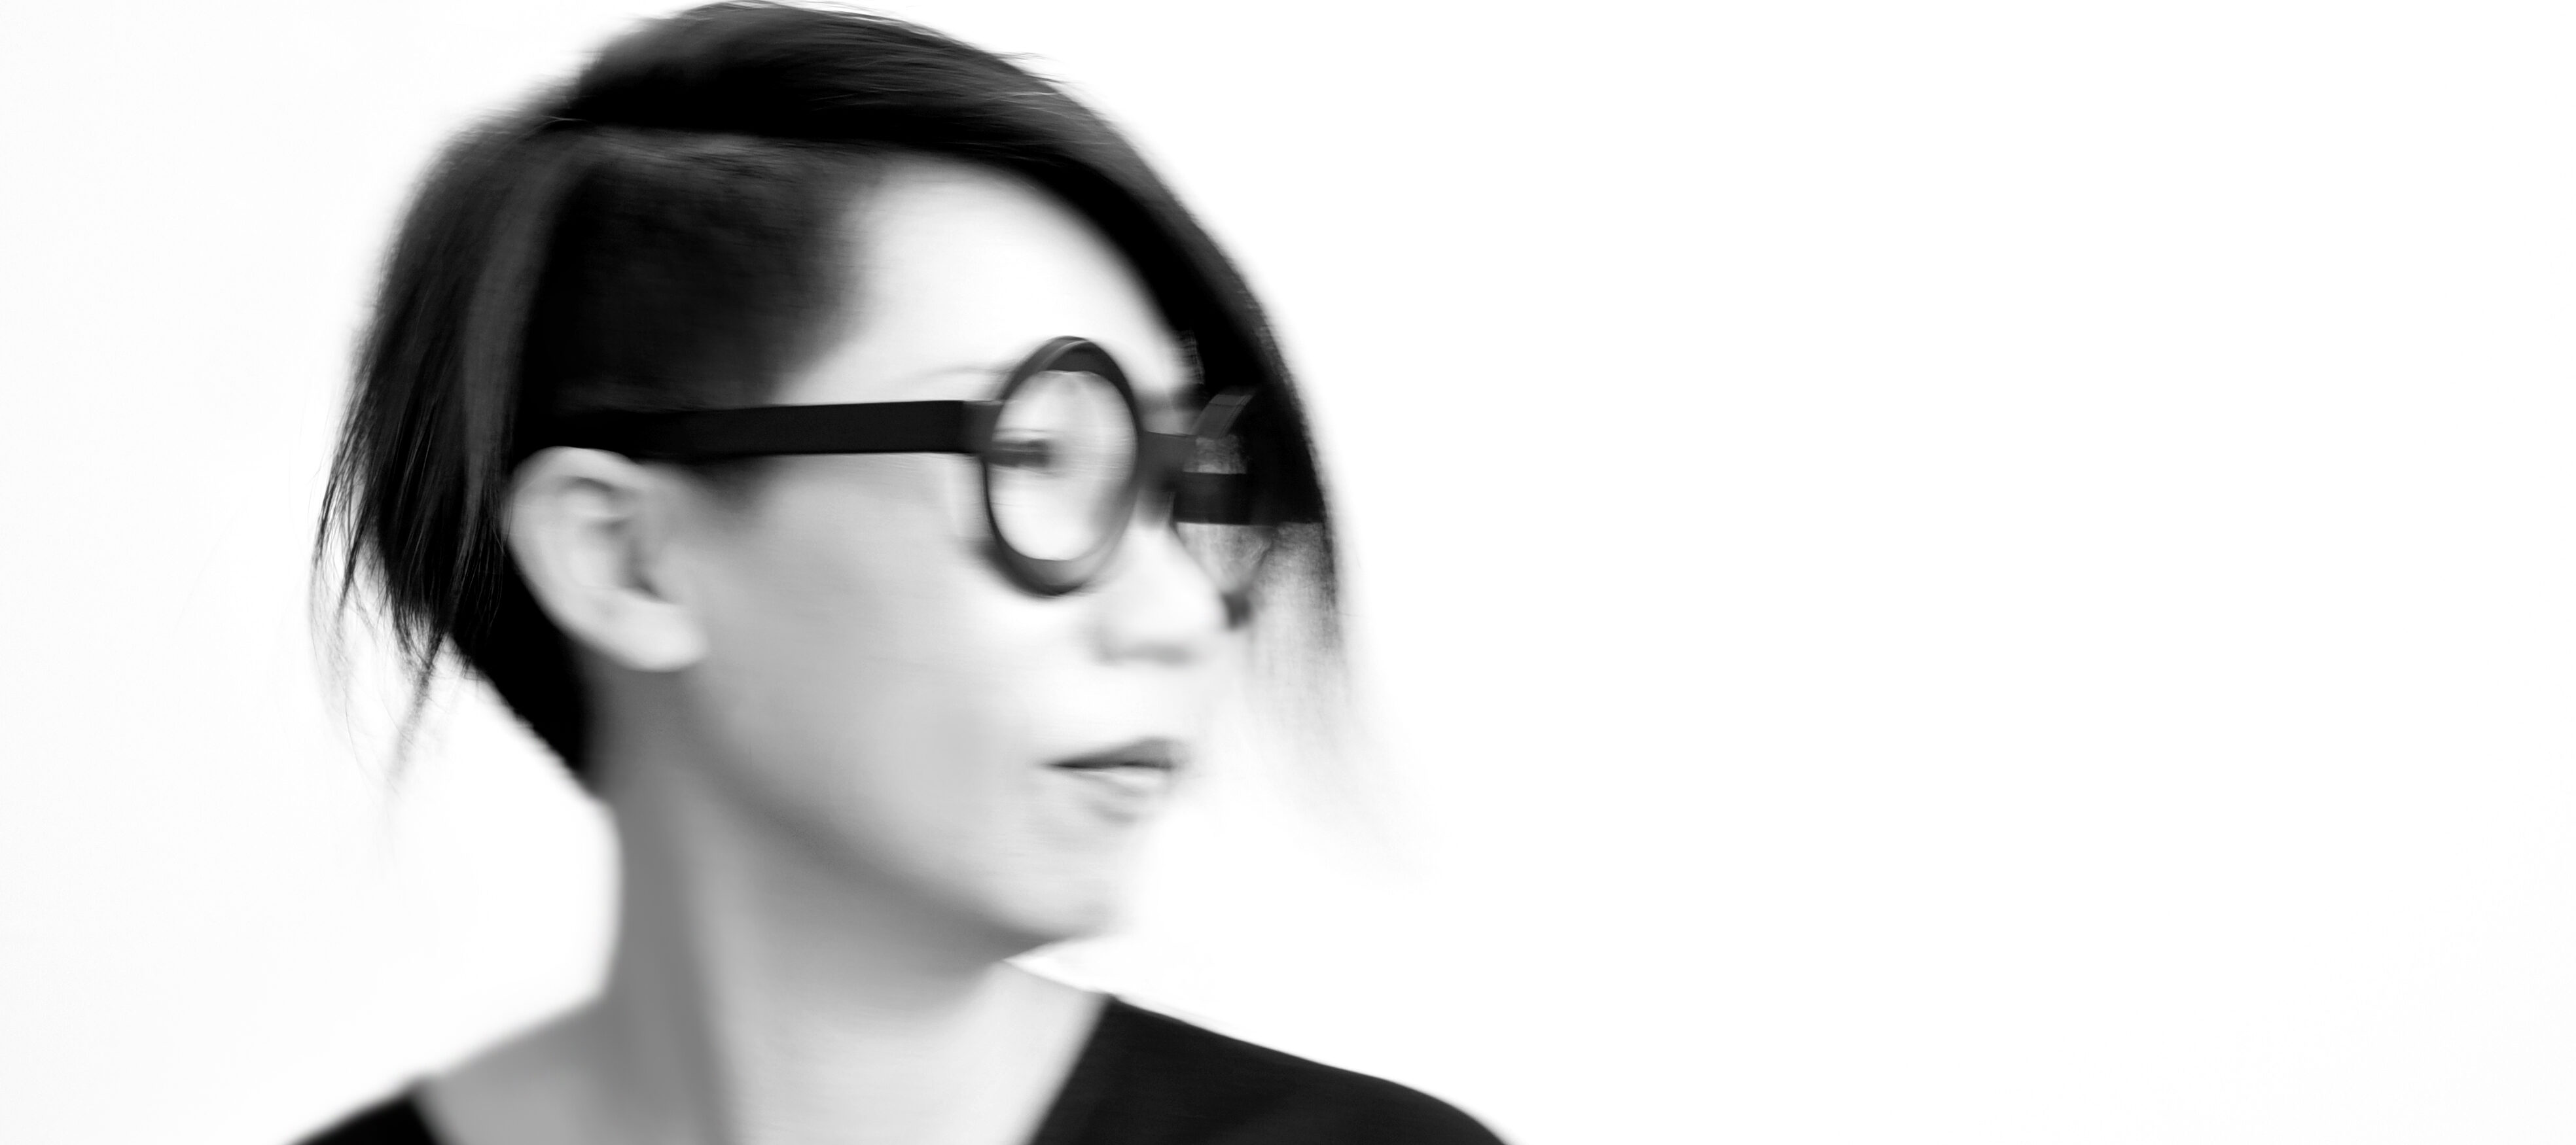 A black-and-white photo shows the blurry portrait of a light-skinned woman of Asian descent looking off to the right. She wears her dark hair cropped close and short, wide-rimmed circular glasses, and a black V-neck shirt.